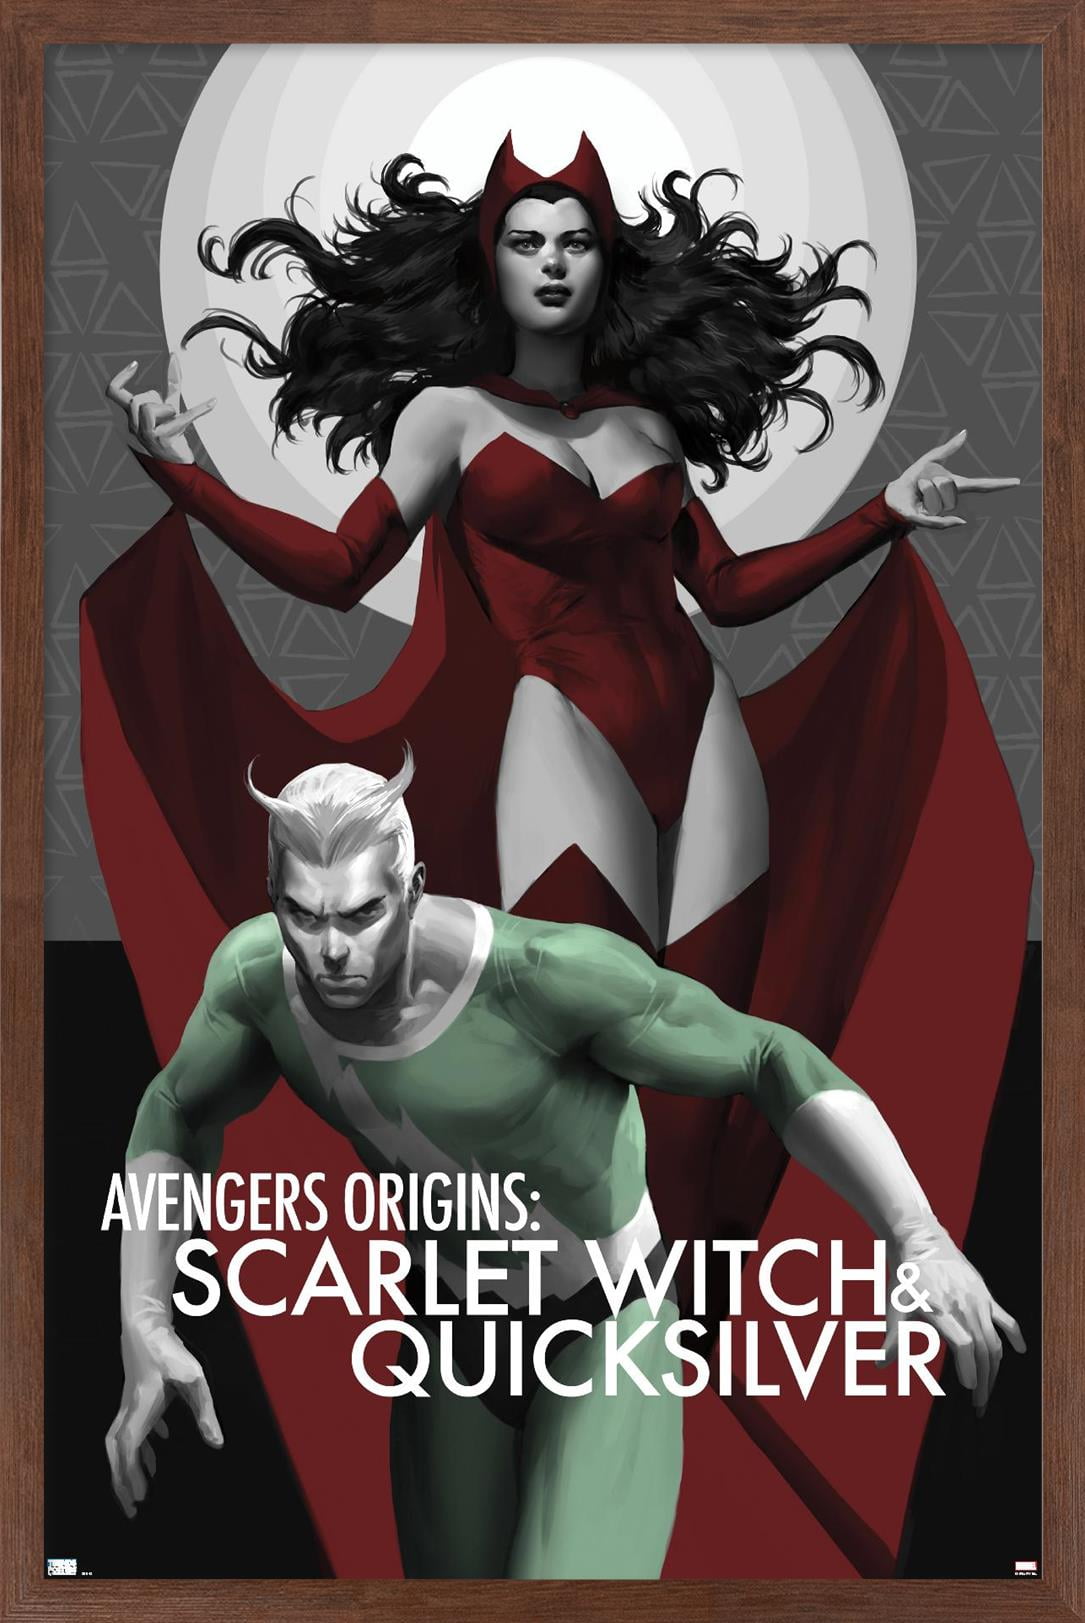 Marvel Comics - Scarlet Witch - The Scarlet Witch & Quicksilver #1